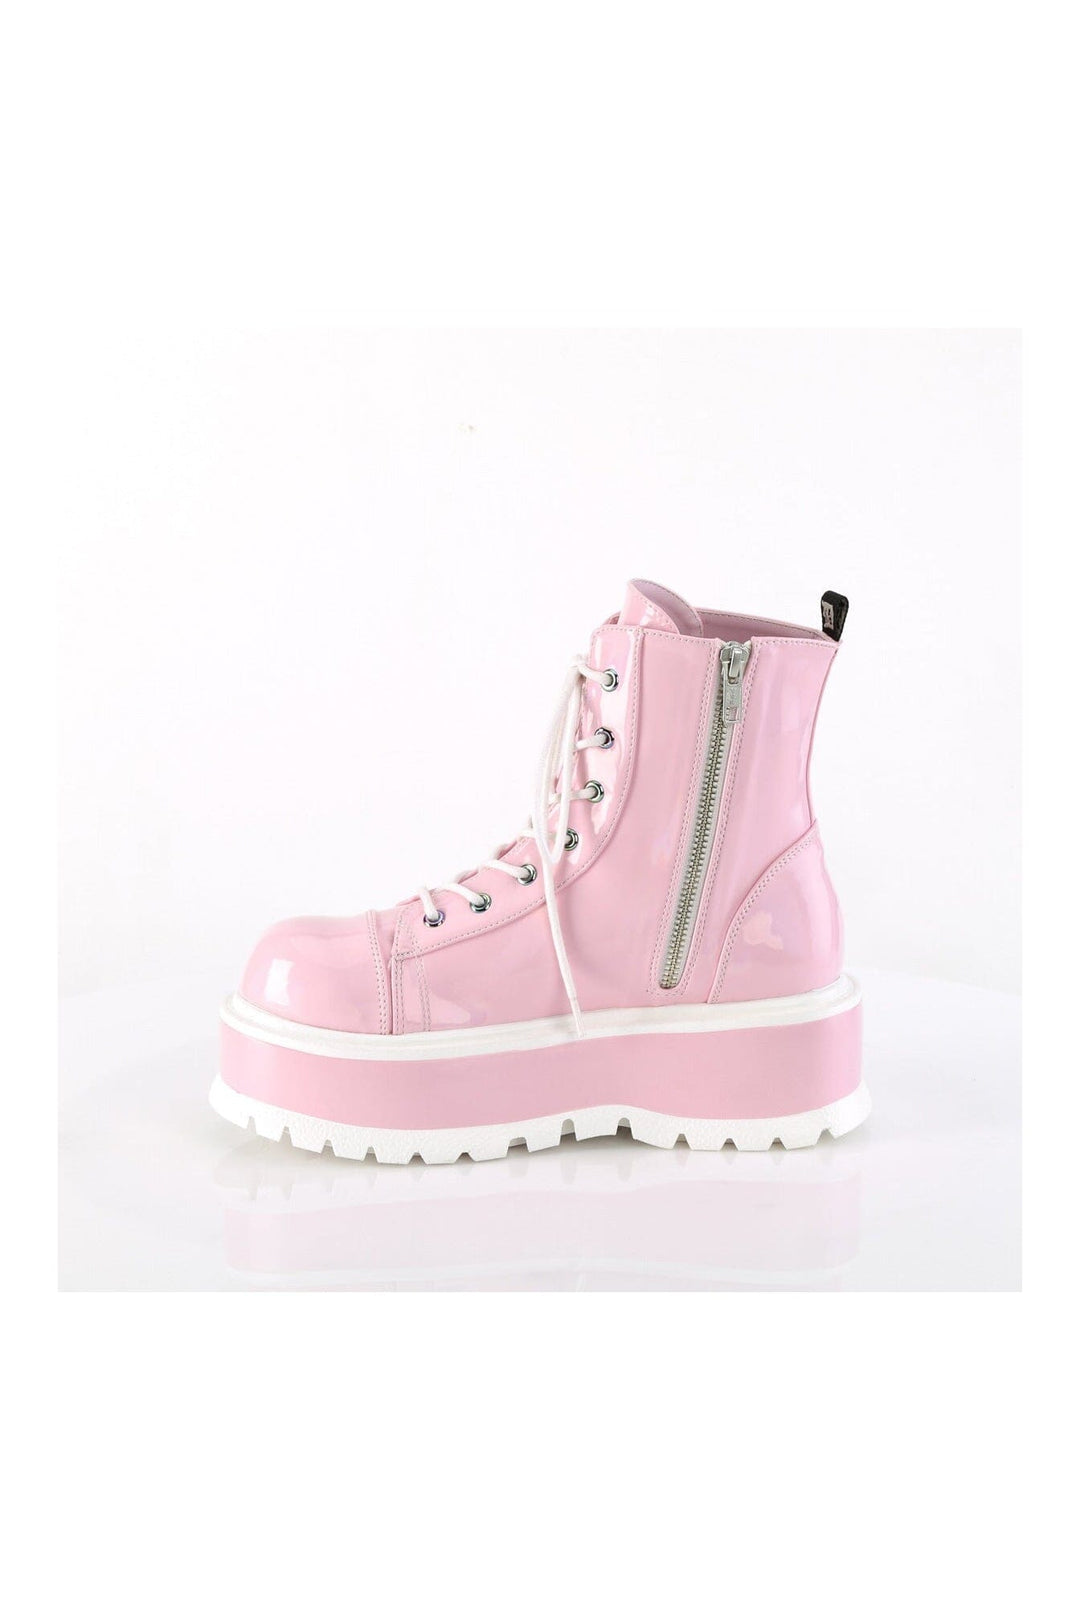 SLACKER-55 Pink Hologram Patent Ankle Boot-Ankle Boots-Demonia-SEXYSHOES.COM